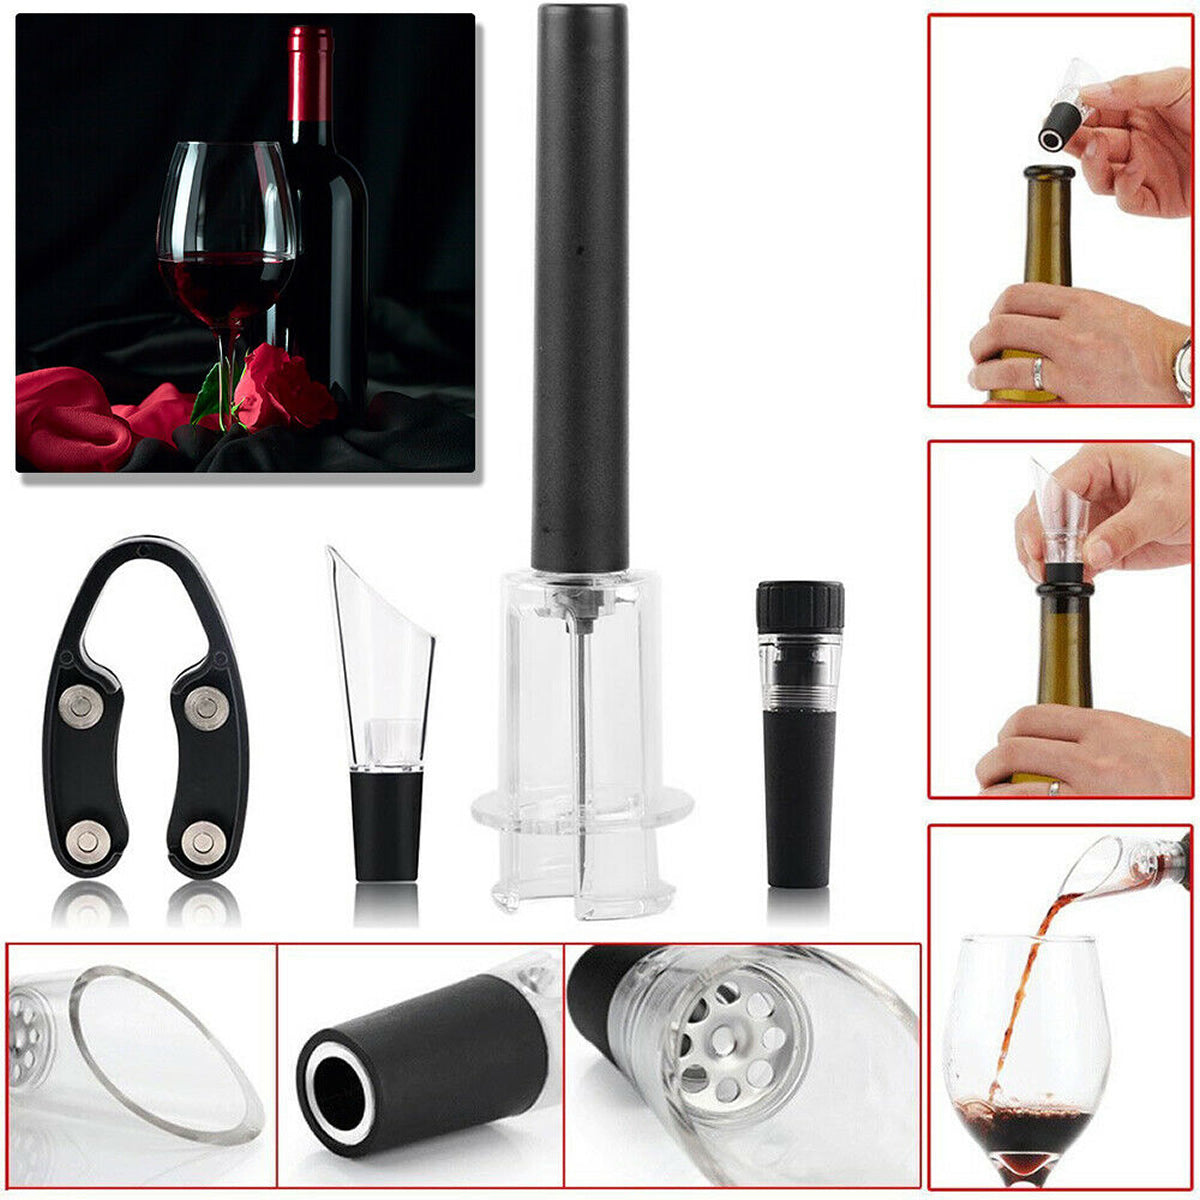 Pour And Preserve Set of 4 Foil Cutter Air Wine Opener Aerator And Wine Stopper